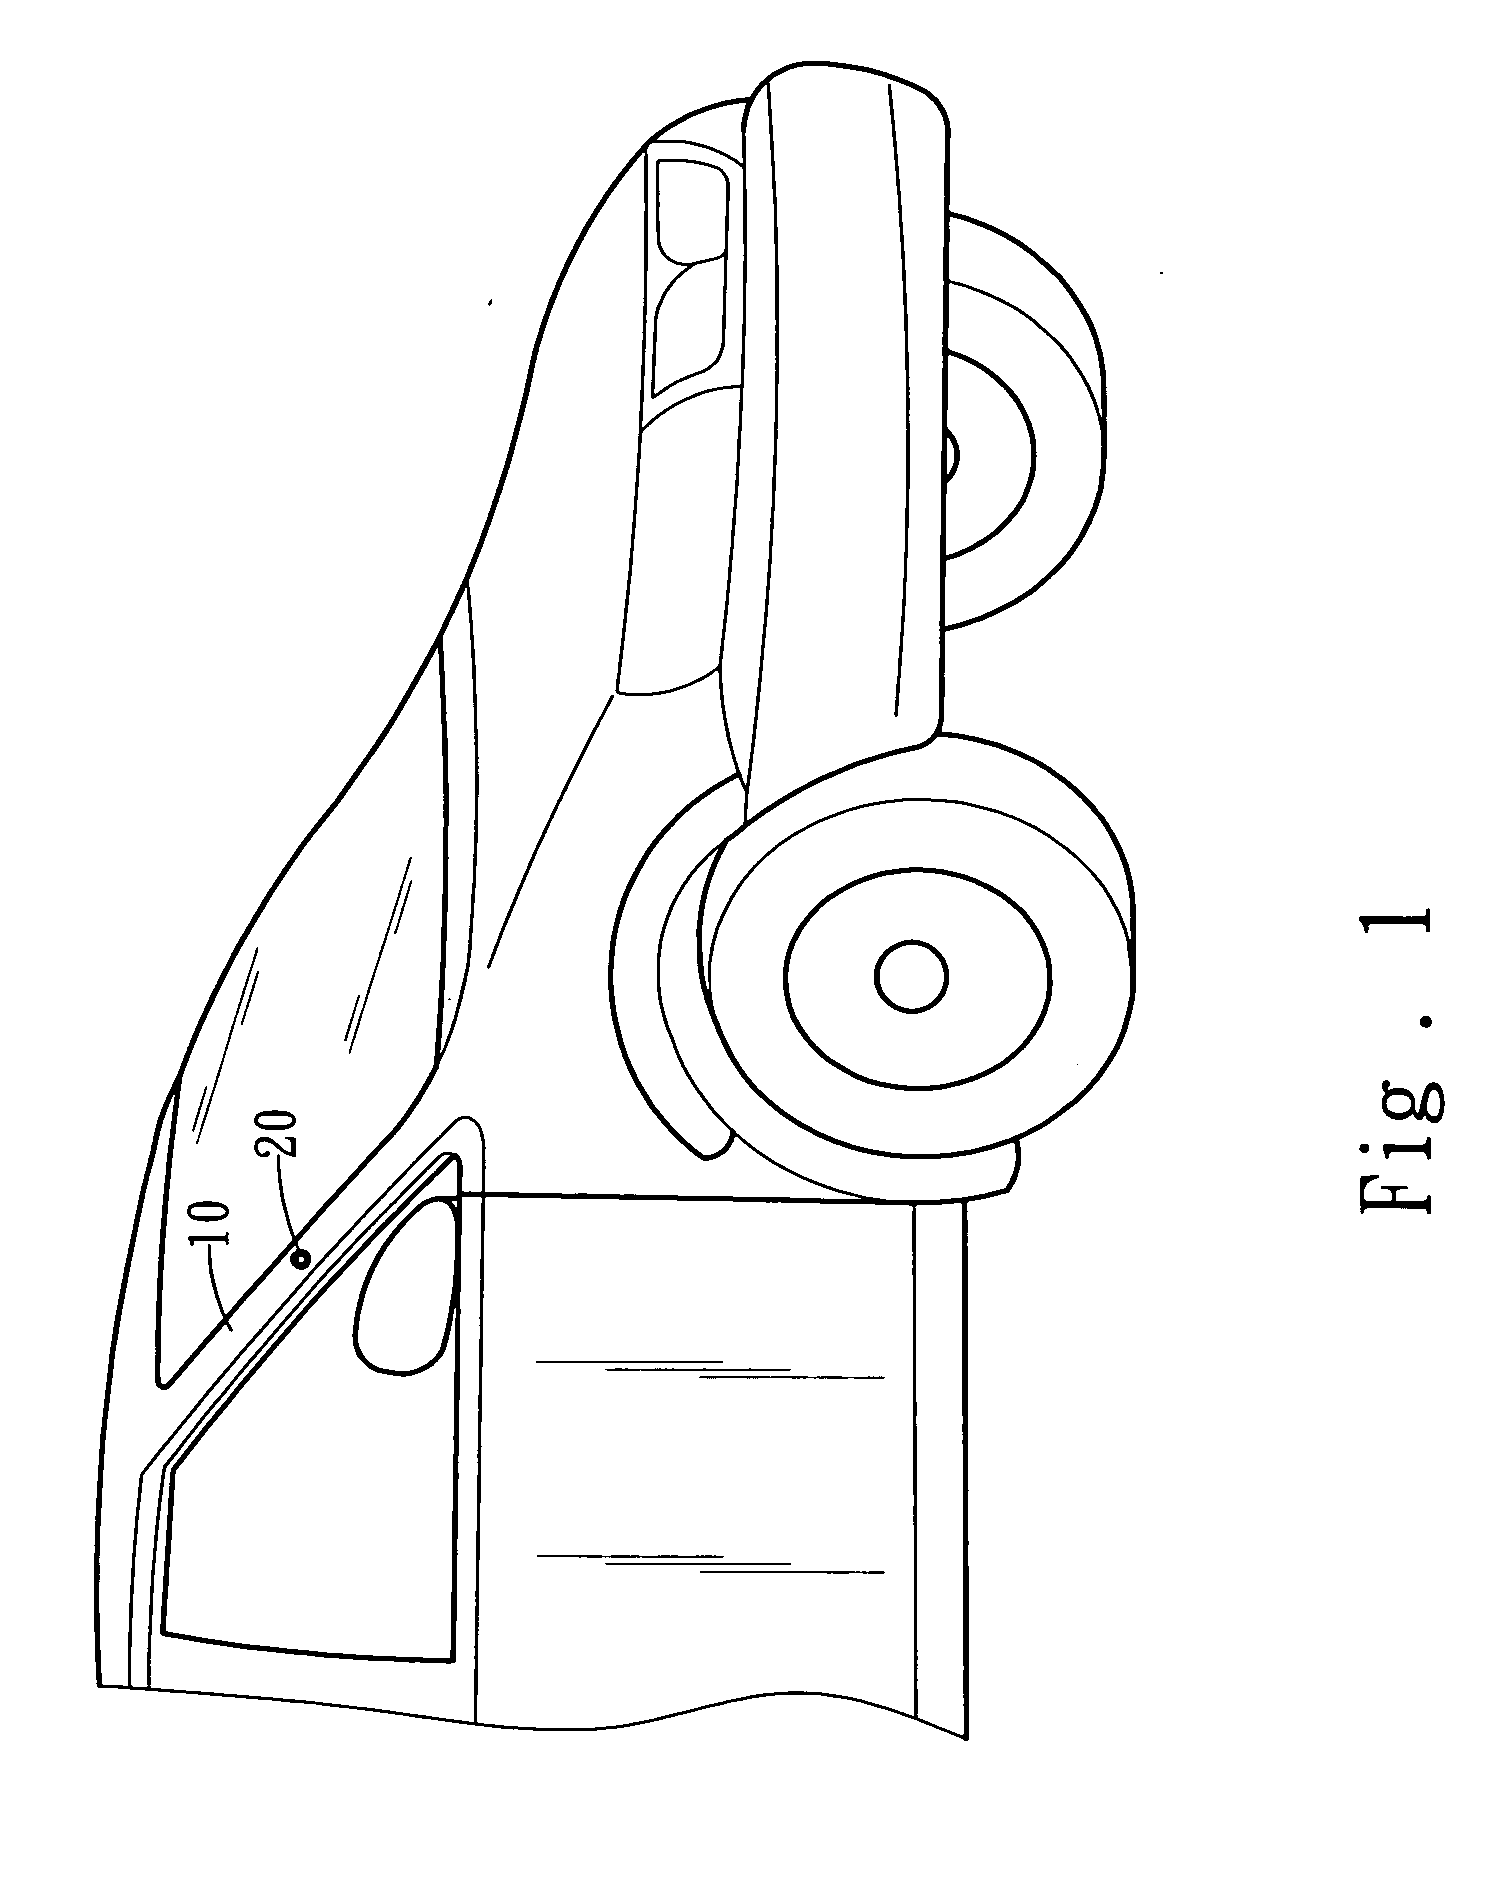 Apparatus for creating effectively transparent A-pillars on vehicle